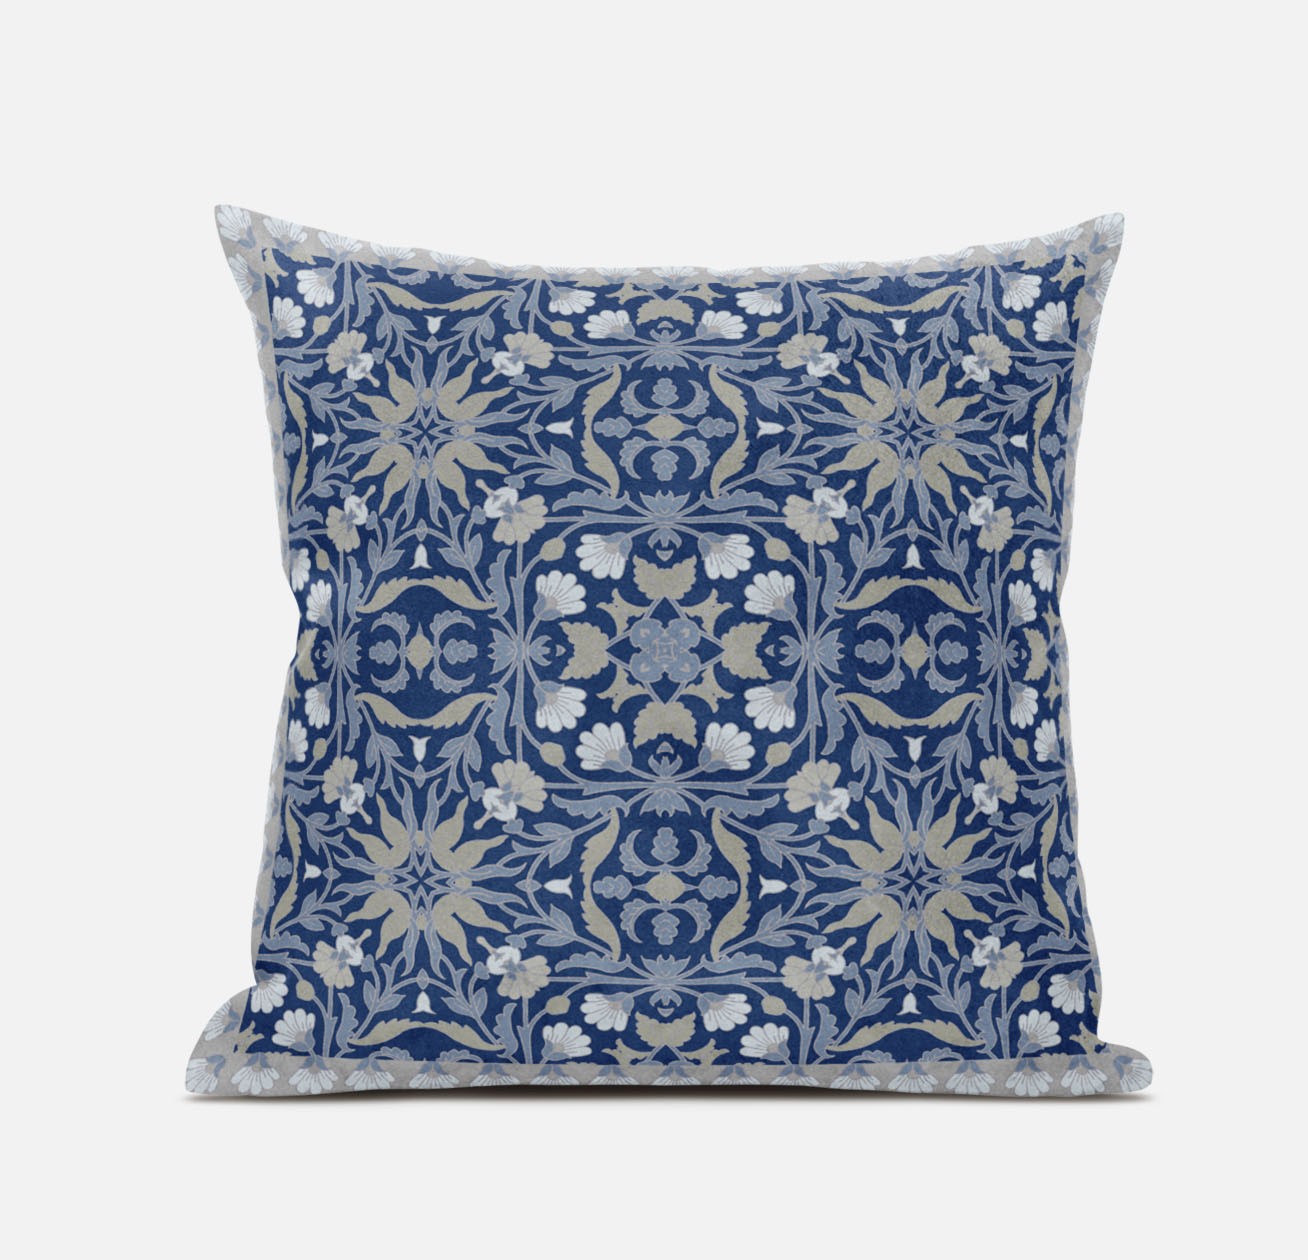 20” Blue Gray Paisley Zippered Suede Throw Pillow-413698-1